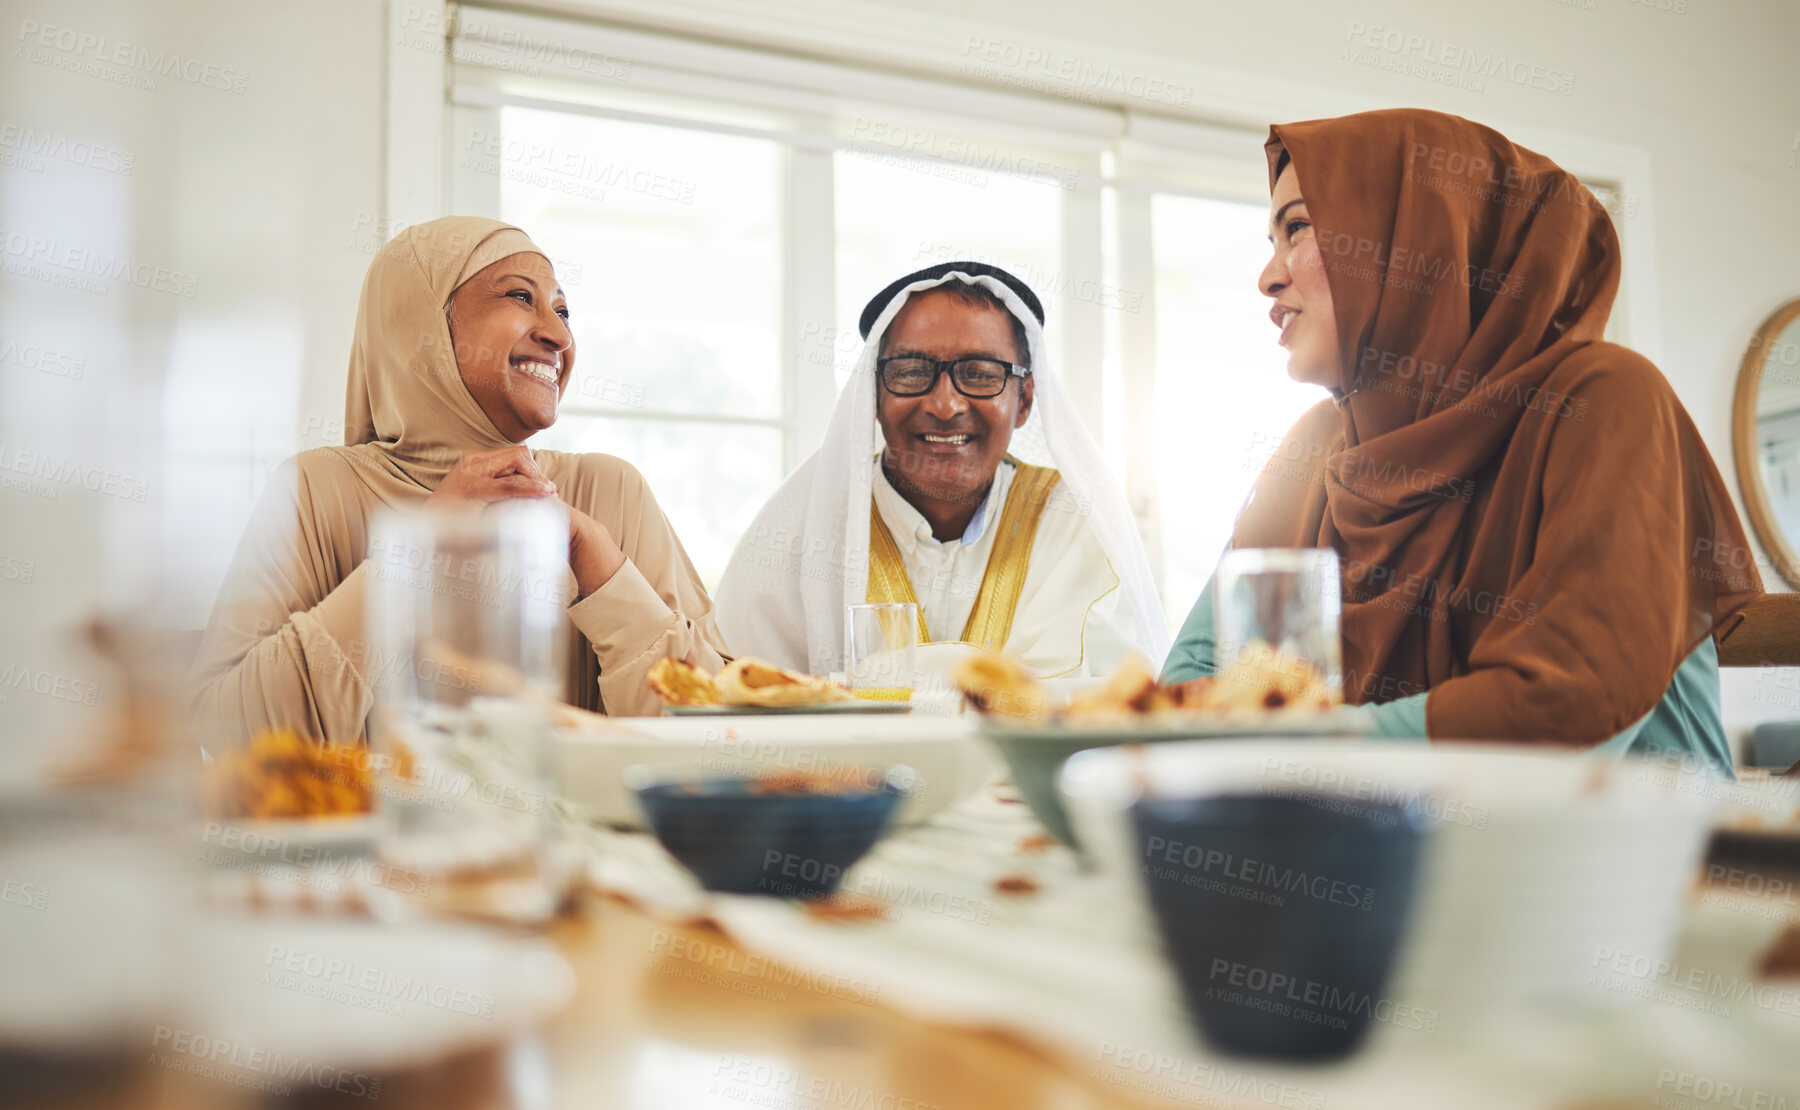 Buy stock photo Food, conversation and muslim with big family at table for eid mubarak, Islamic celebration and lunch. Ramadan festival, culture and iftar with people eating at home for fasting, religion and holiday